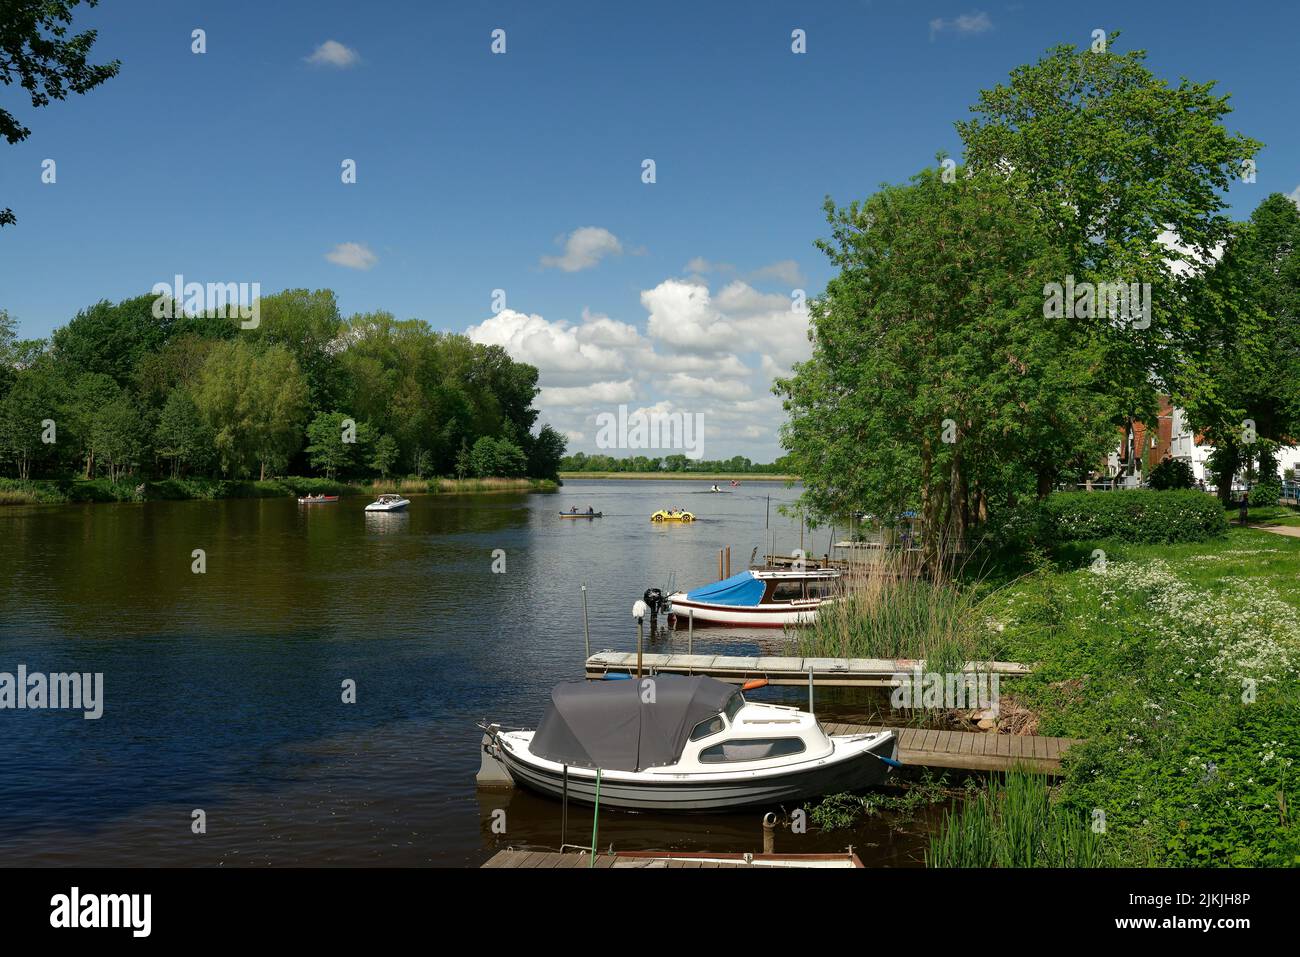 Boats at the Westersielzug in view of the river Treene, Friedrichstadt, the Dutch town on the peninsula Eiderstedt, North Frisia, peninsula Eiderstedt, Schleswig-Holstein, Germany Stock Photo